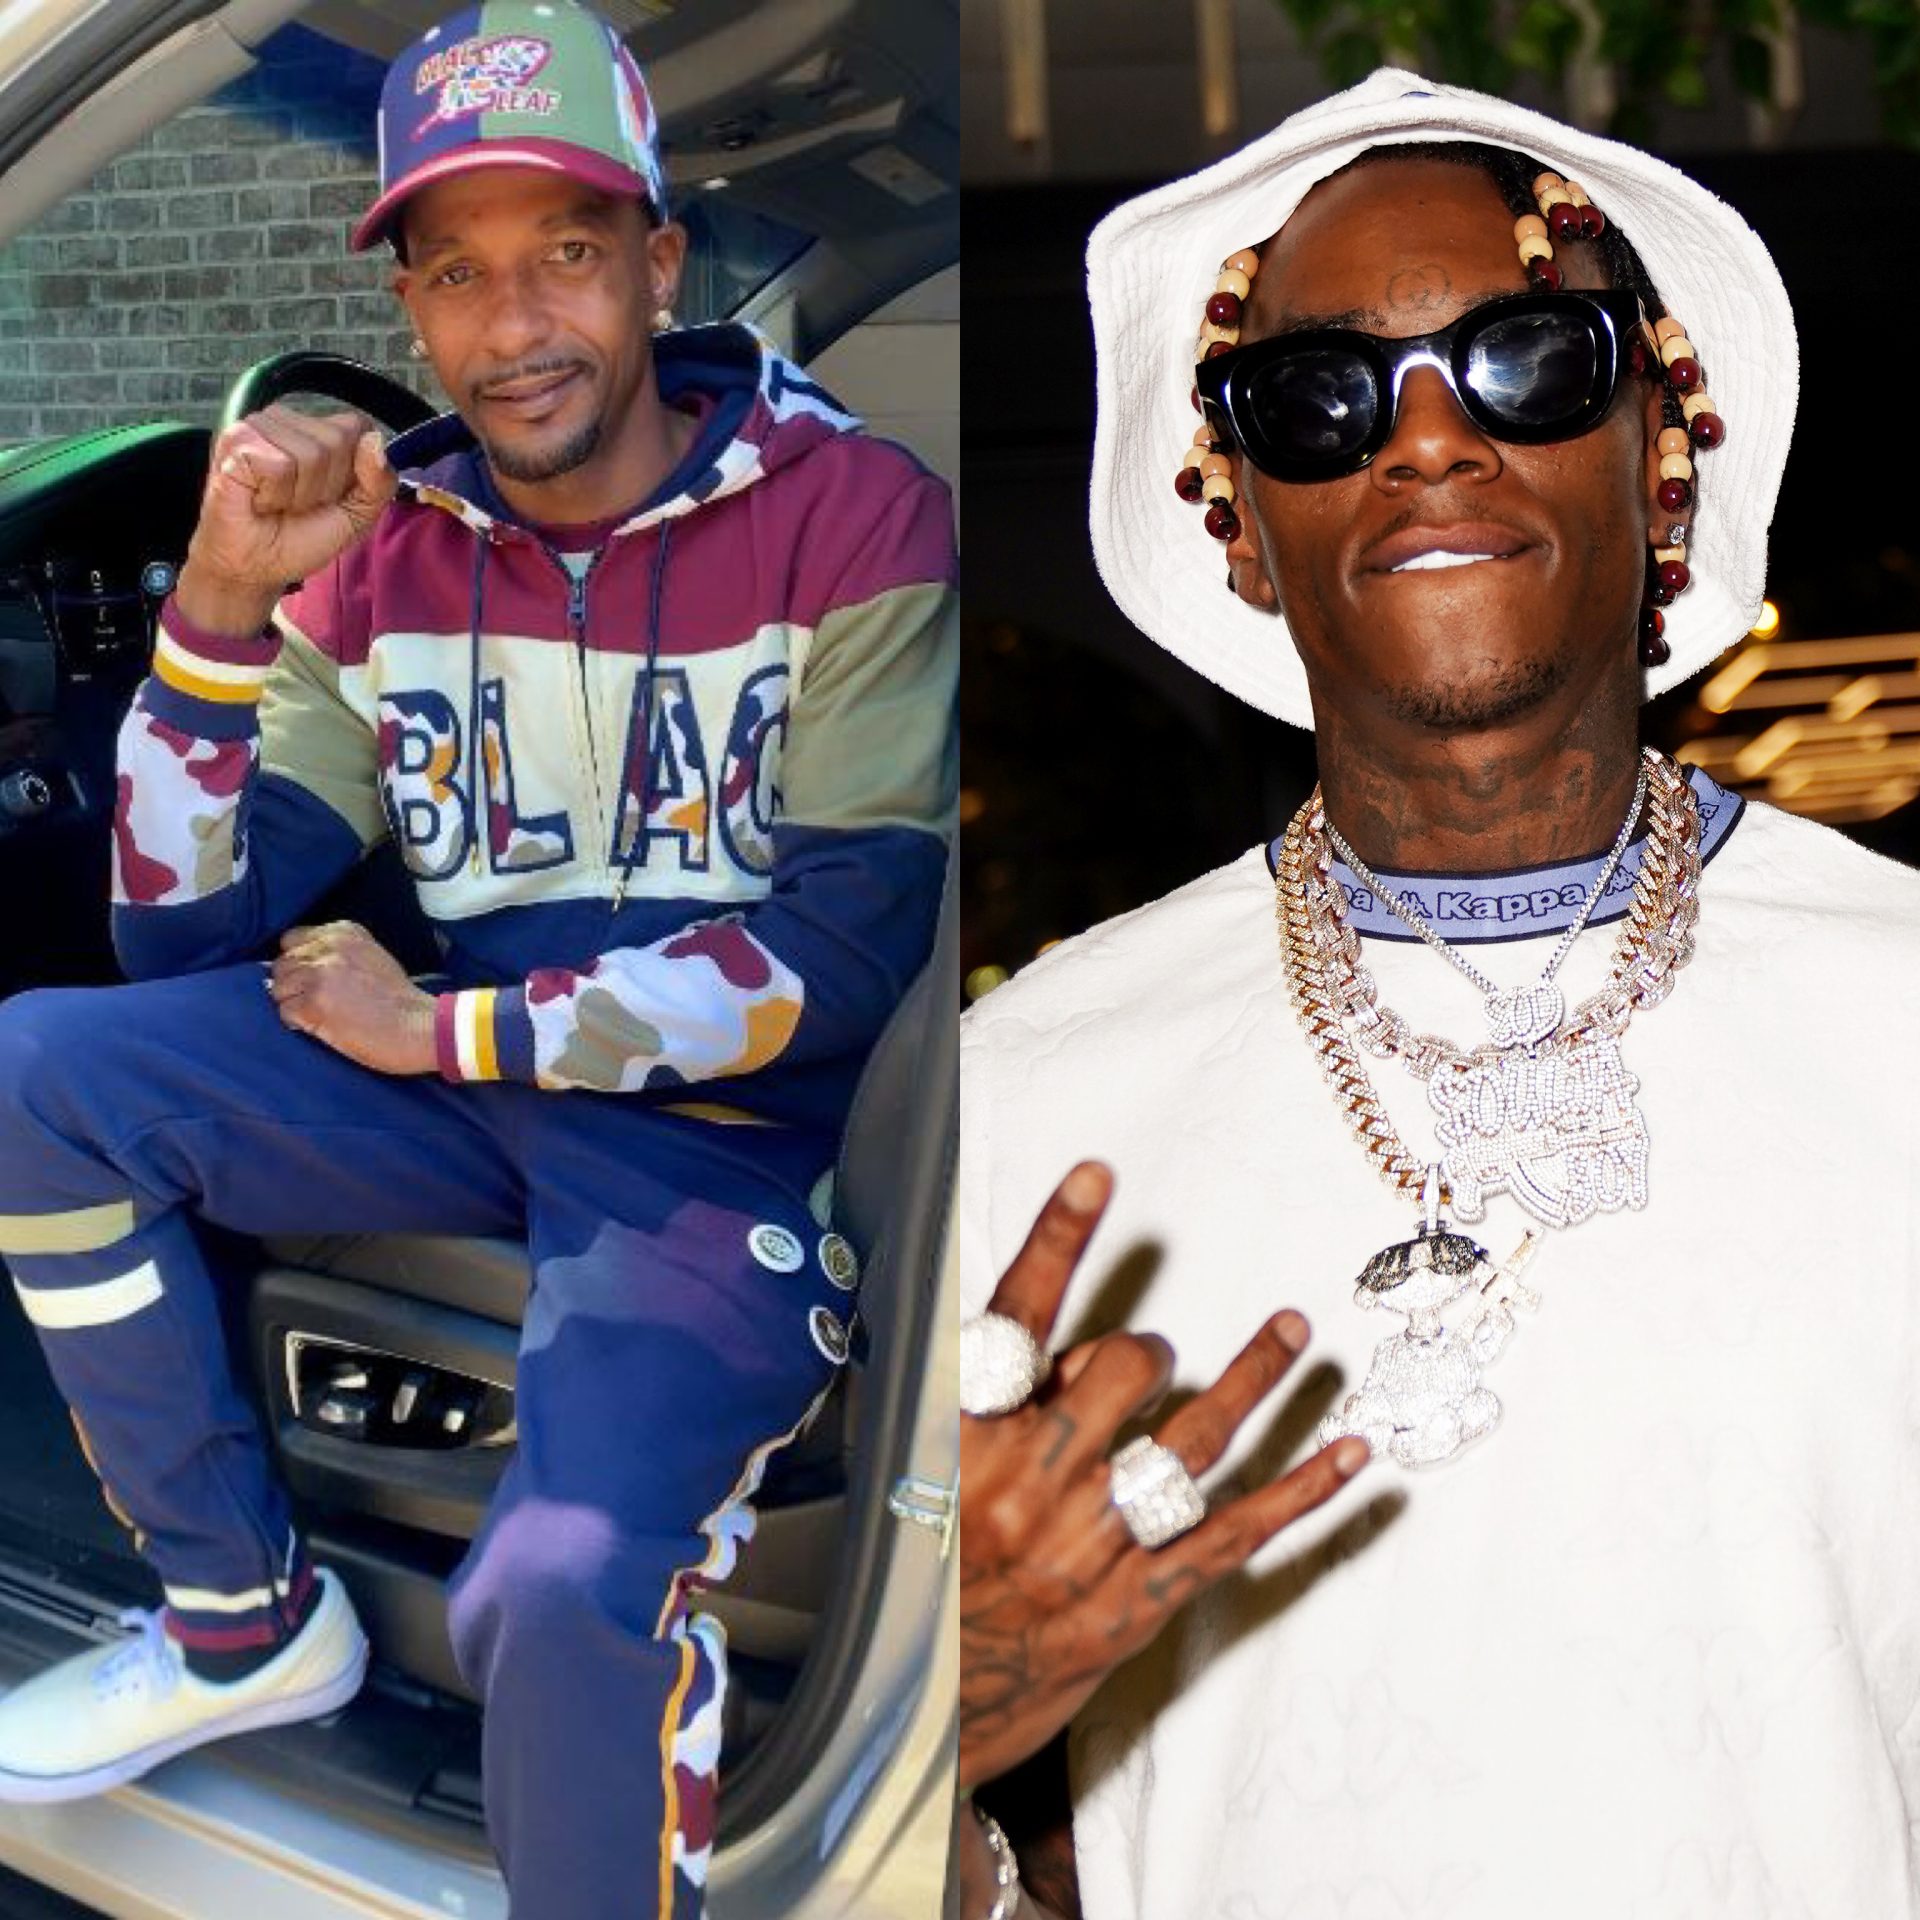 Real Story New Charleston White Files Police Report Against Soulja Babe His Friend Following